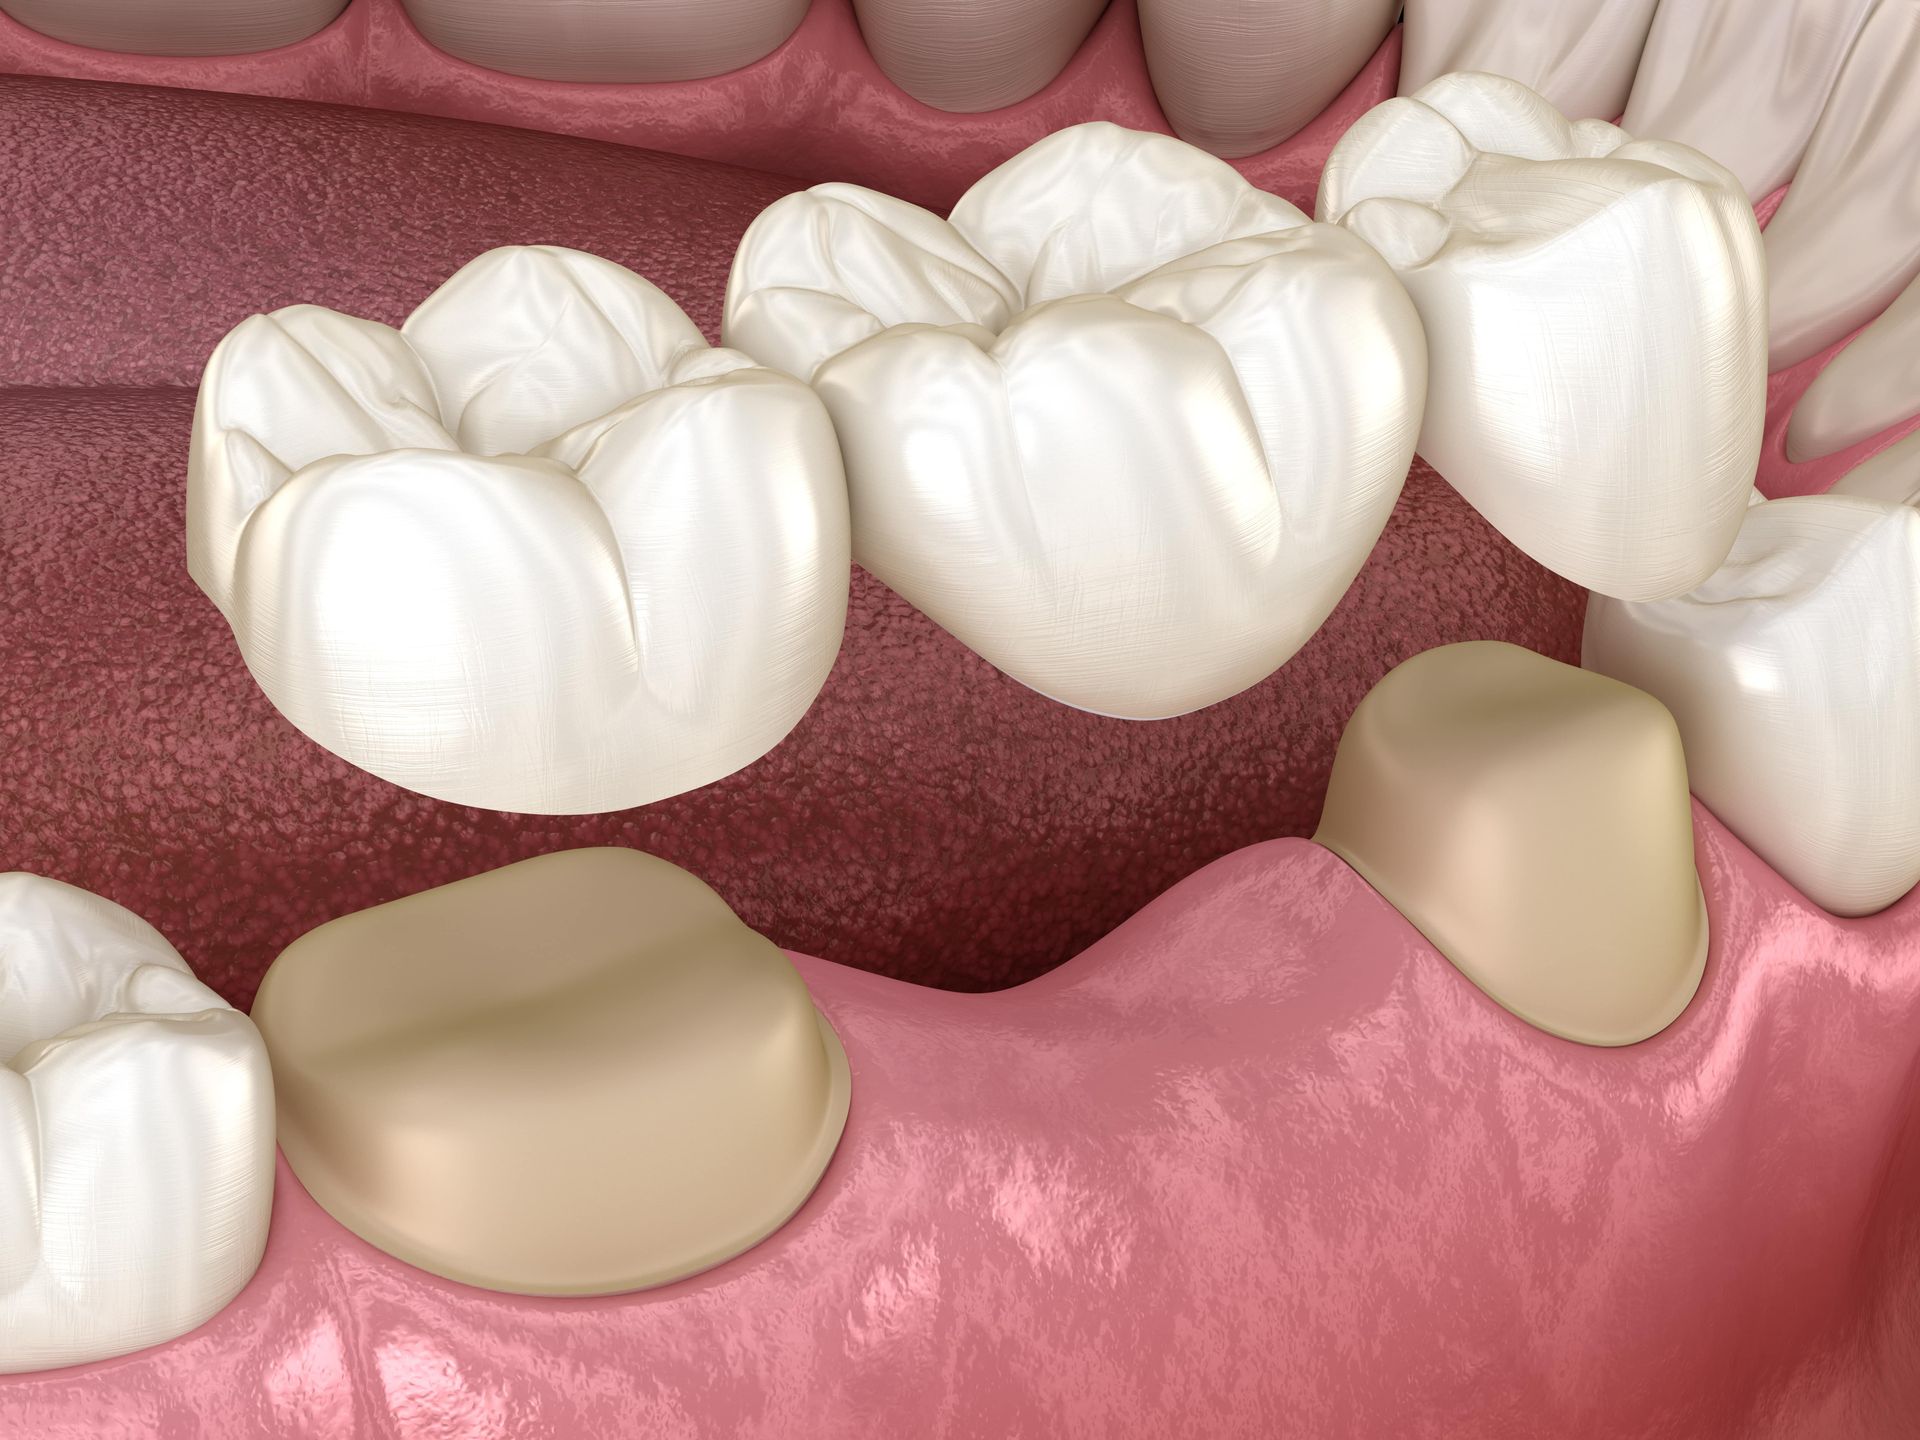 Tooth Replacement Solutions at a Boise Dental Clinic